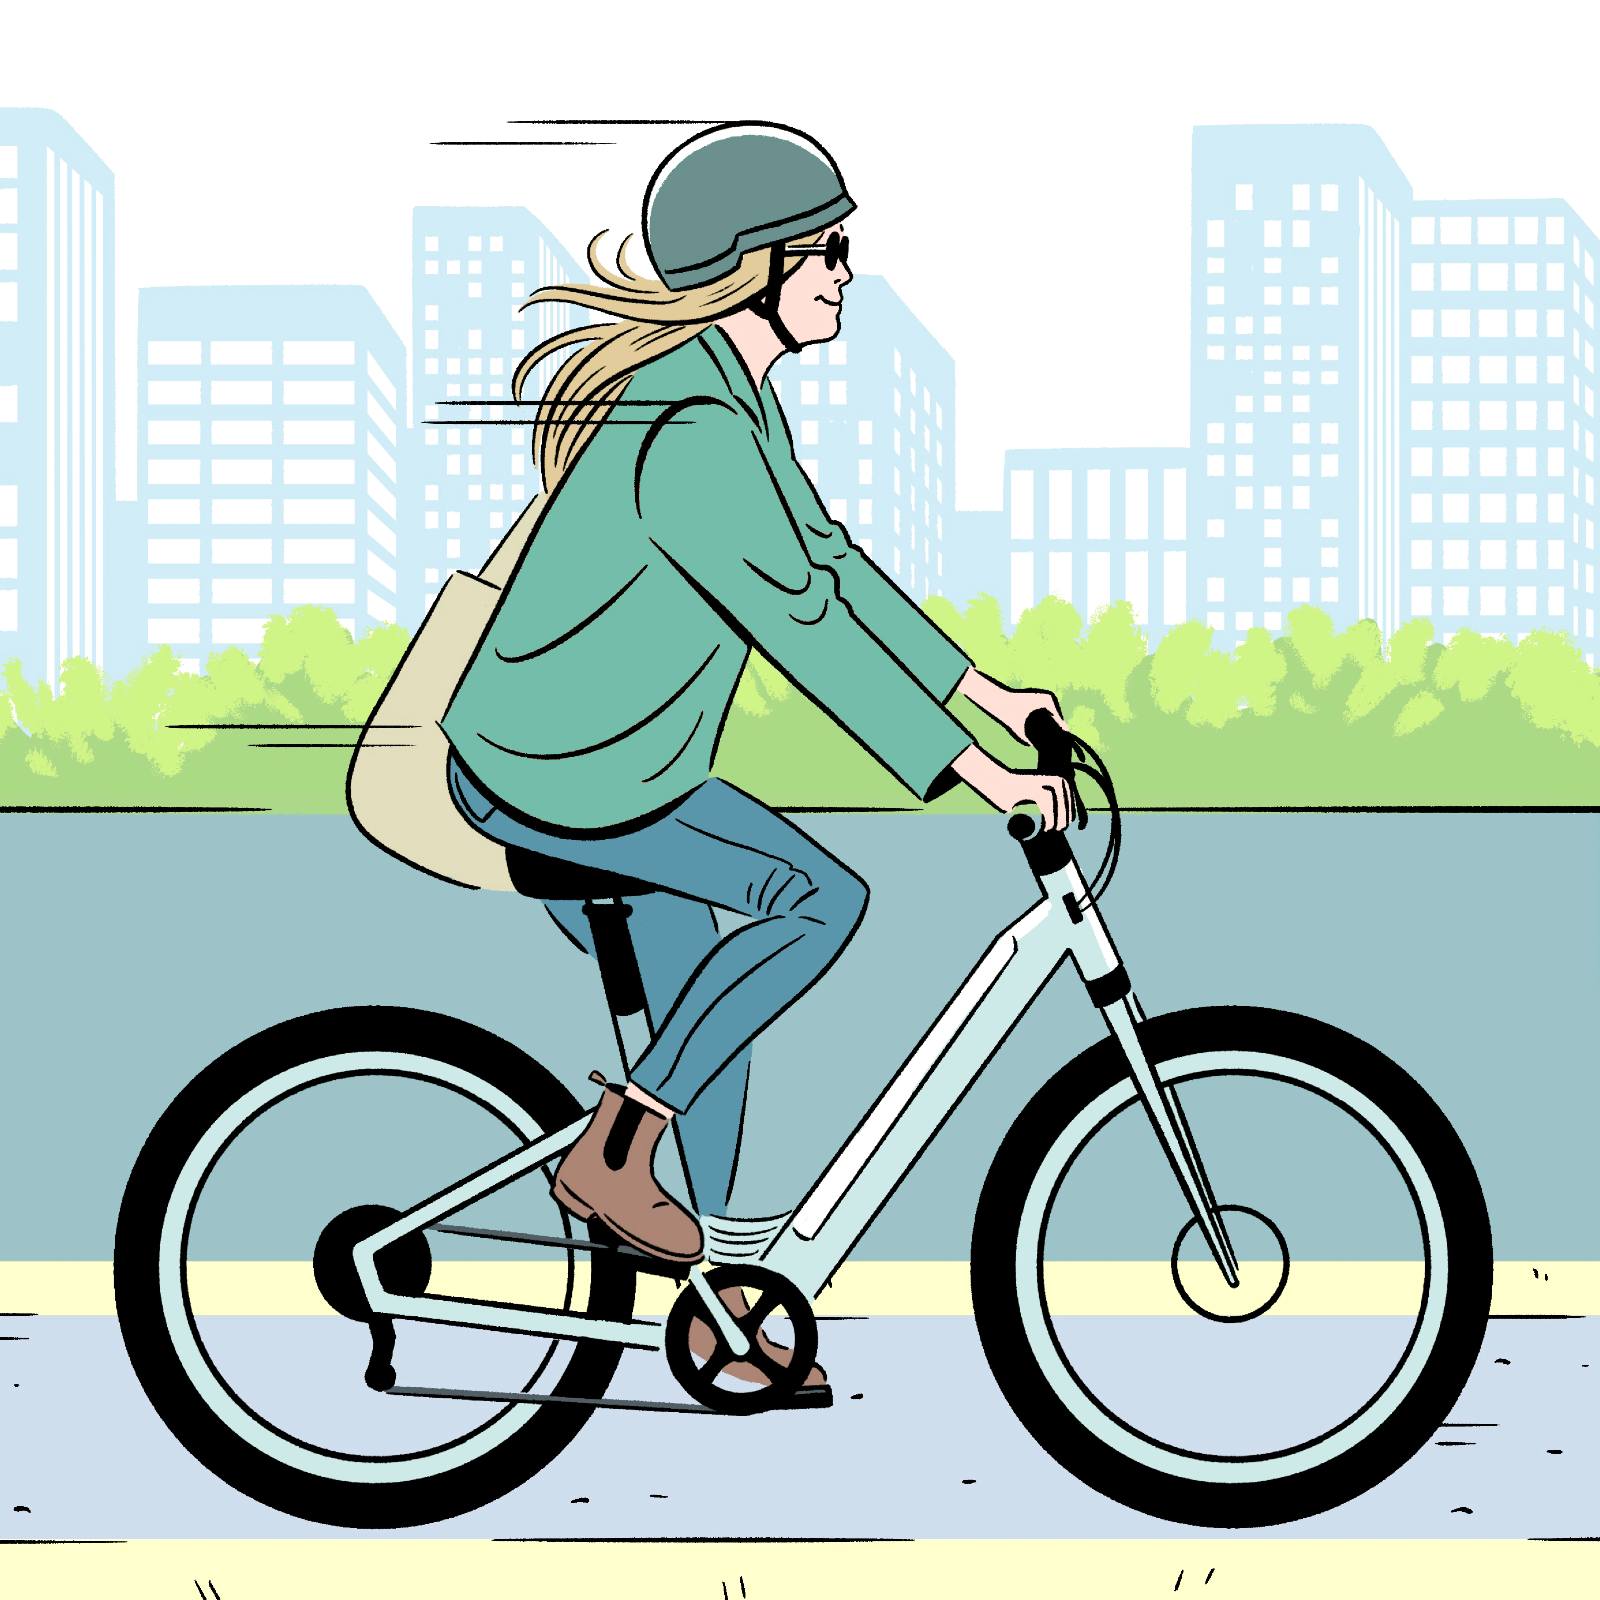 Illustration of a cyclist riding in front of an urban landscape